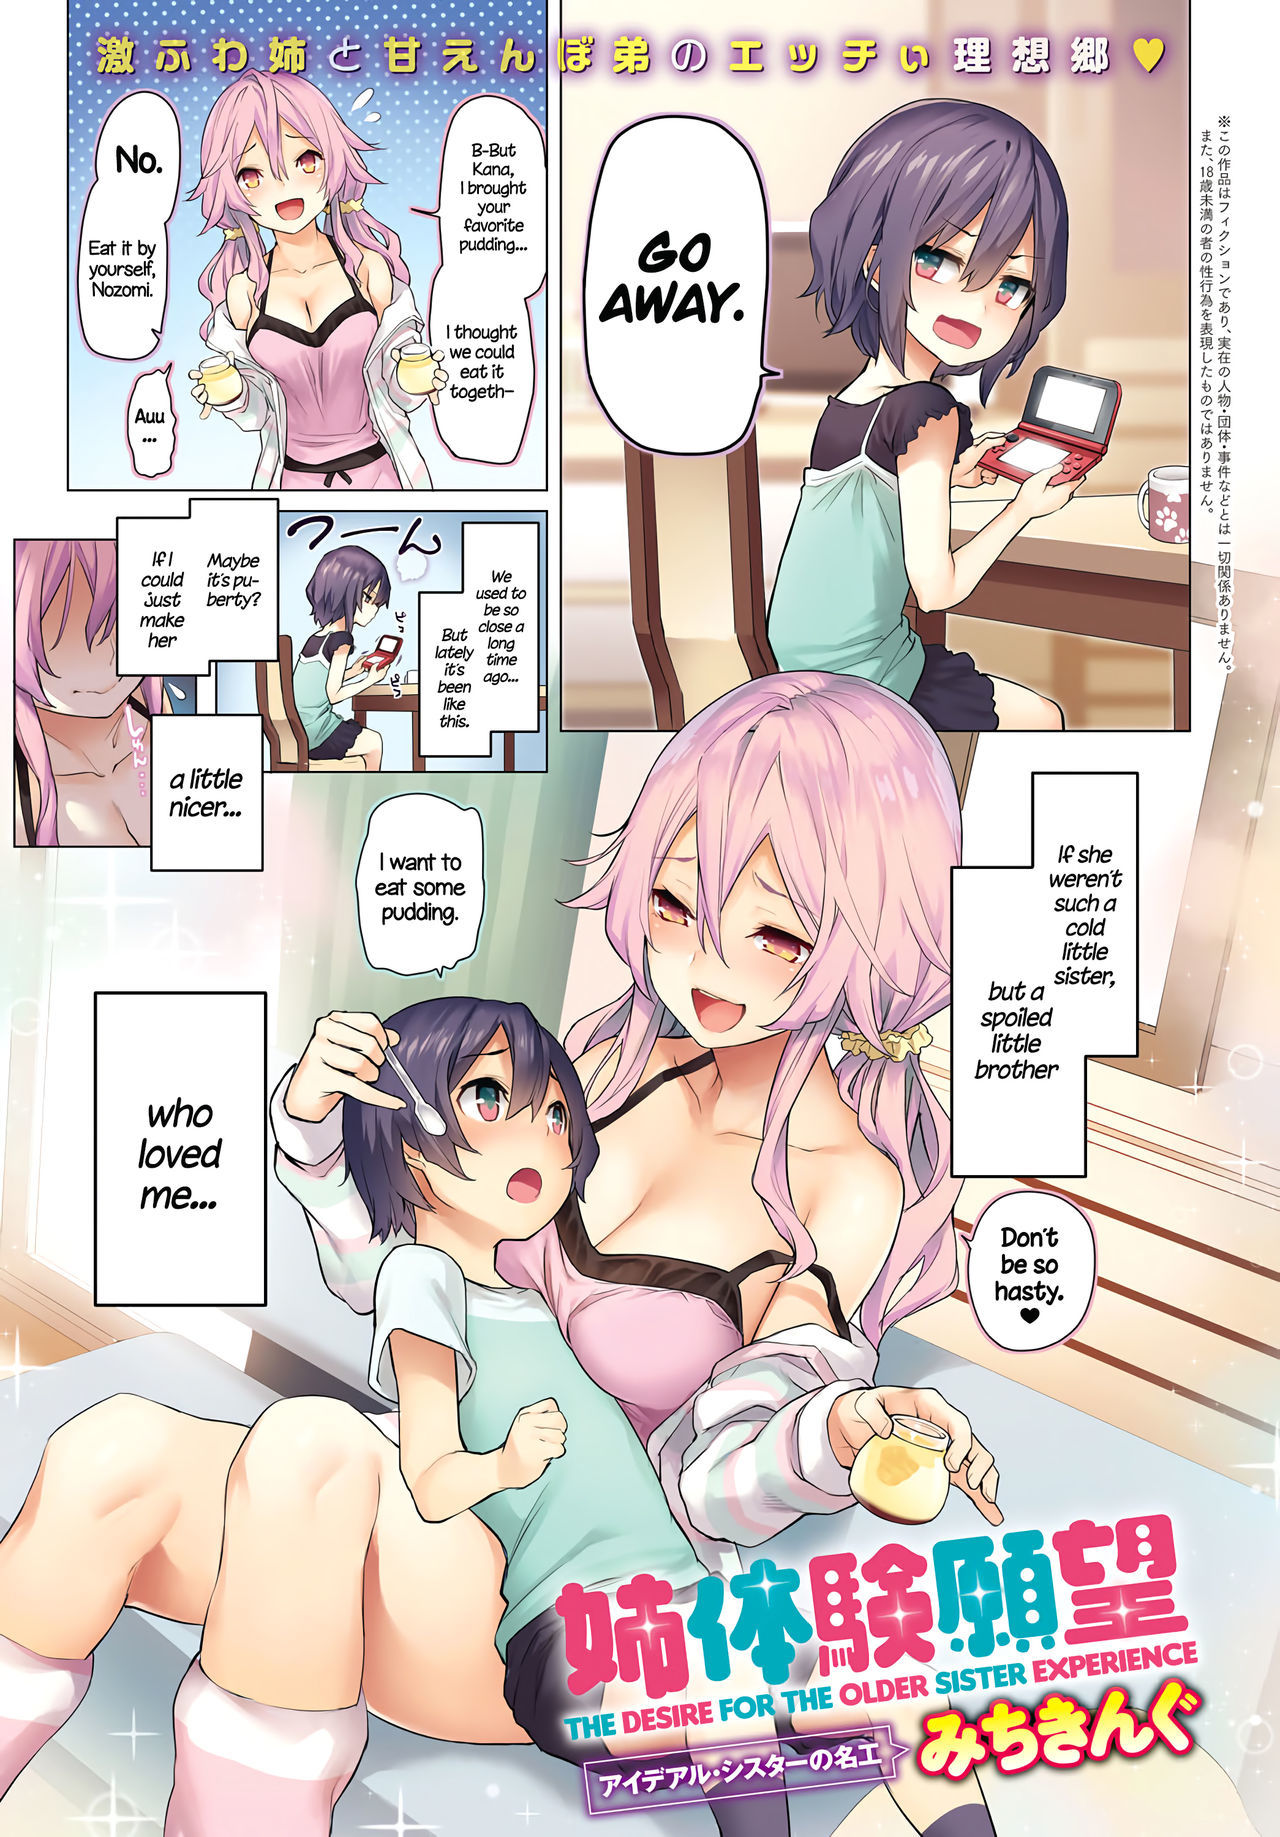 Hentai- The Desire For The Older Sister Experience page 1